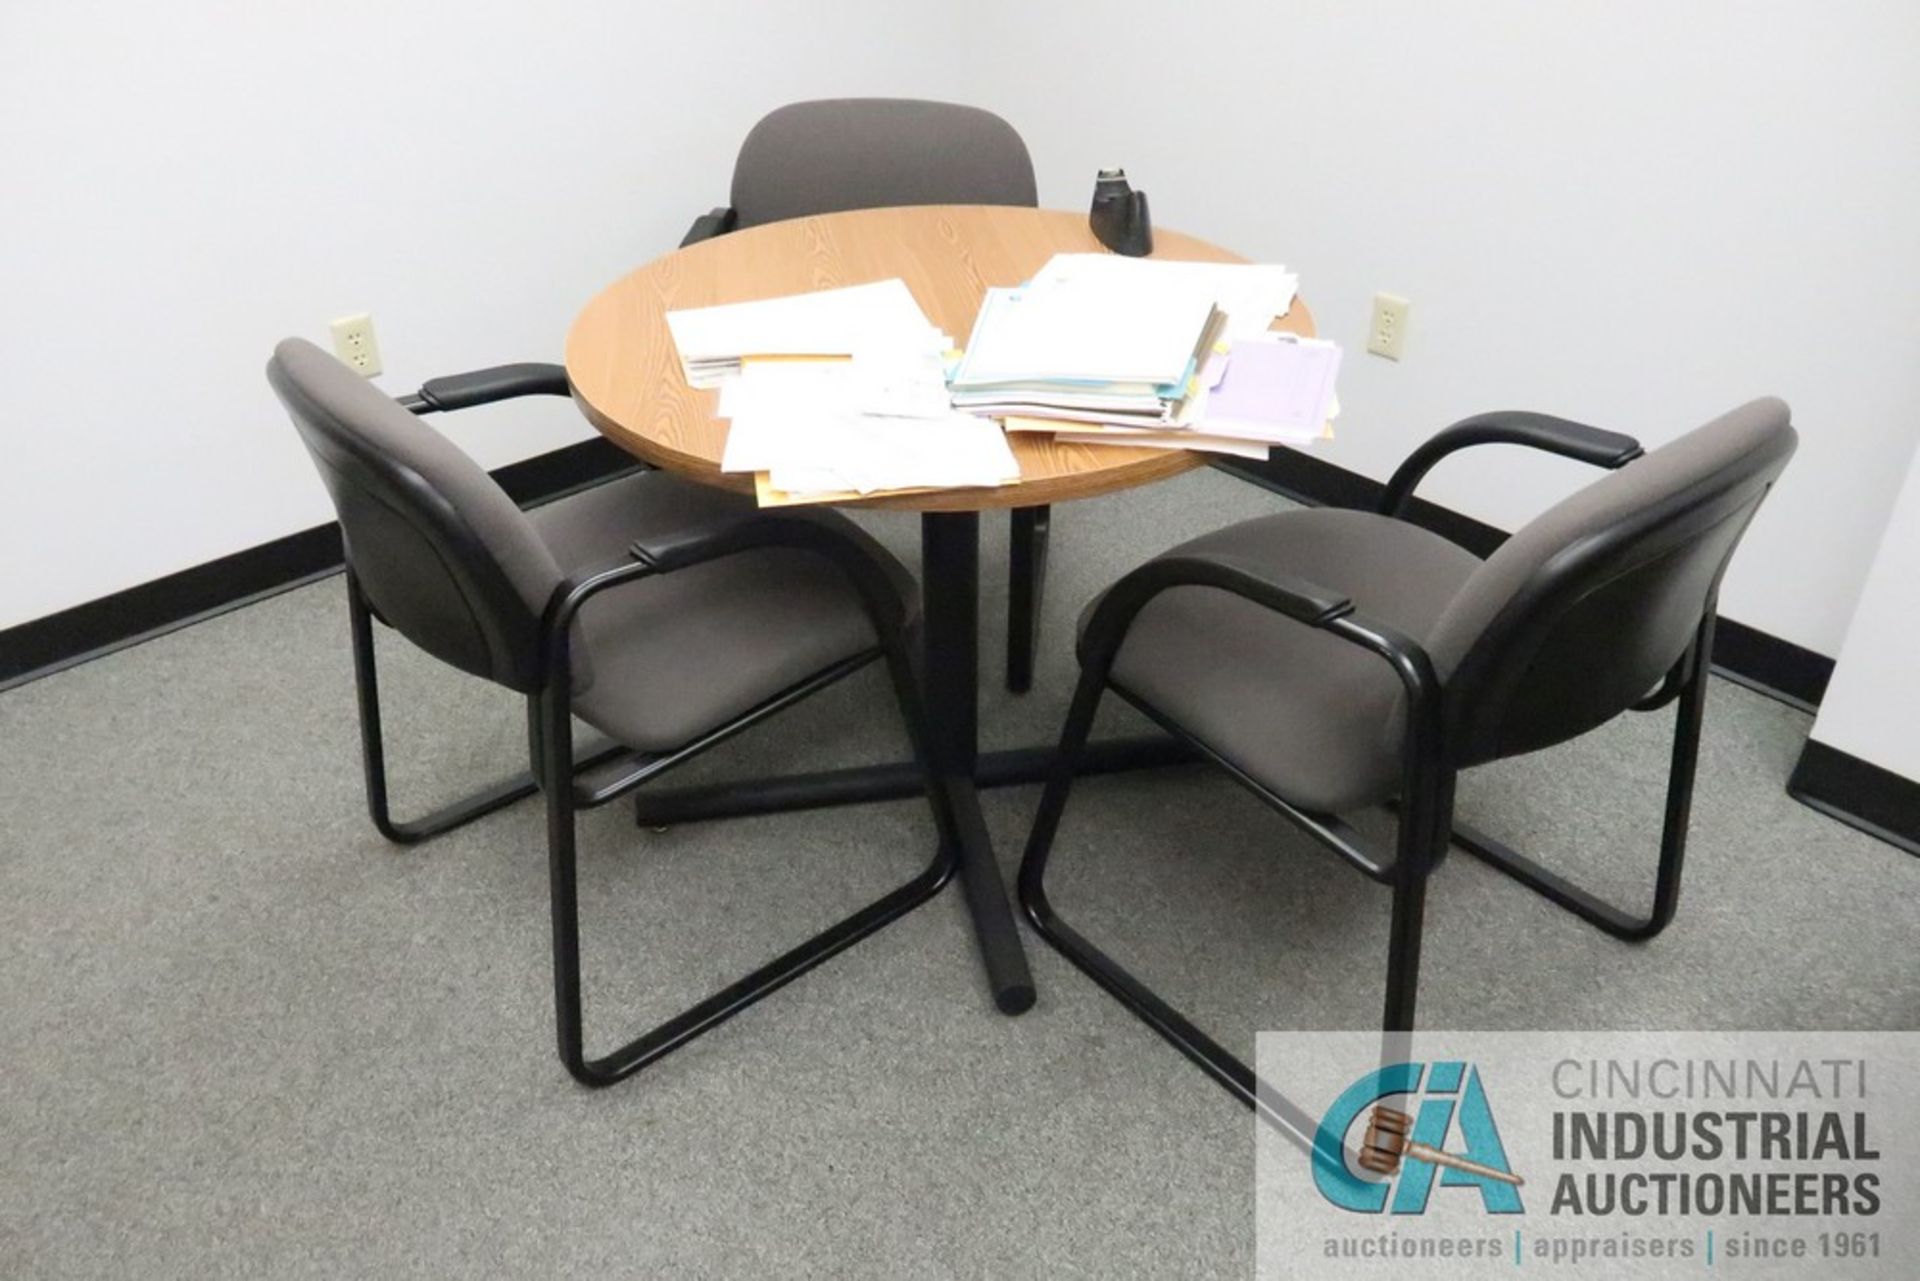 72" X 36" DESK, HON, 4-DRAWER LATERAL FILE HON, (1) EXECUTIVE CHAIR, 36" DIAMETER TABLE, (4) SIDE - Image 4 of 4